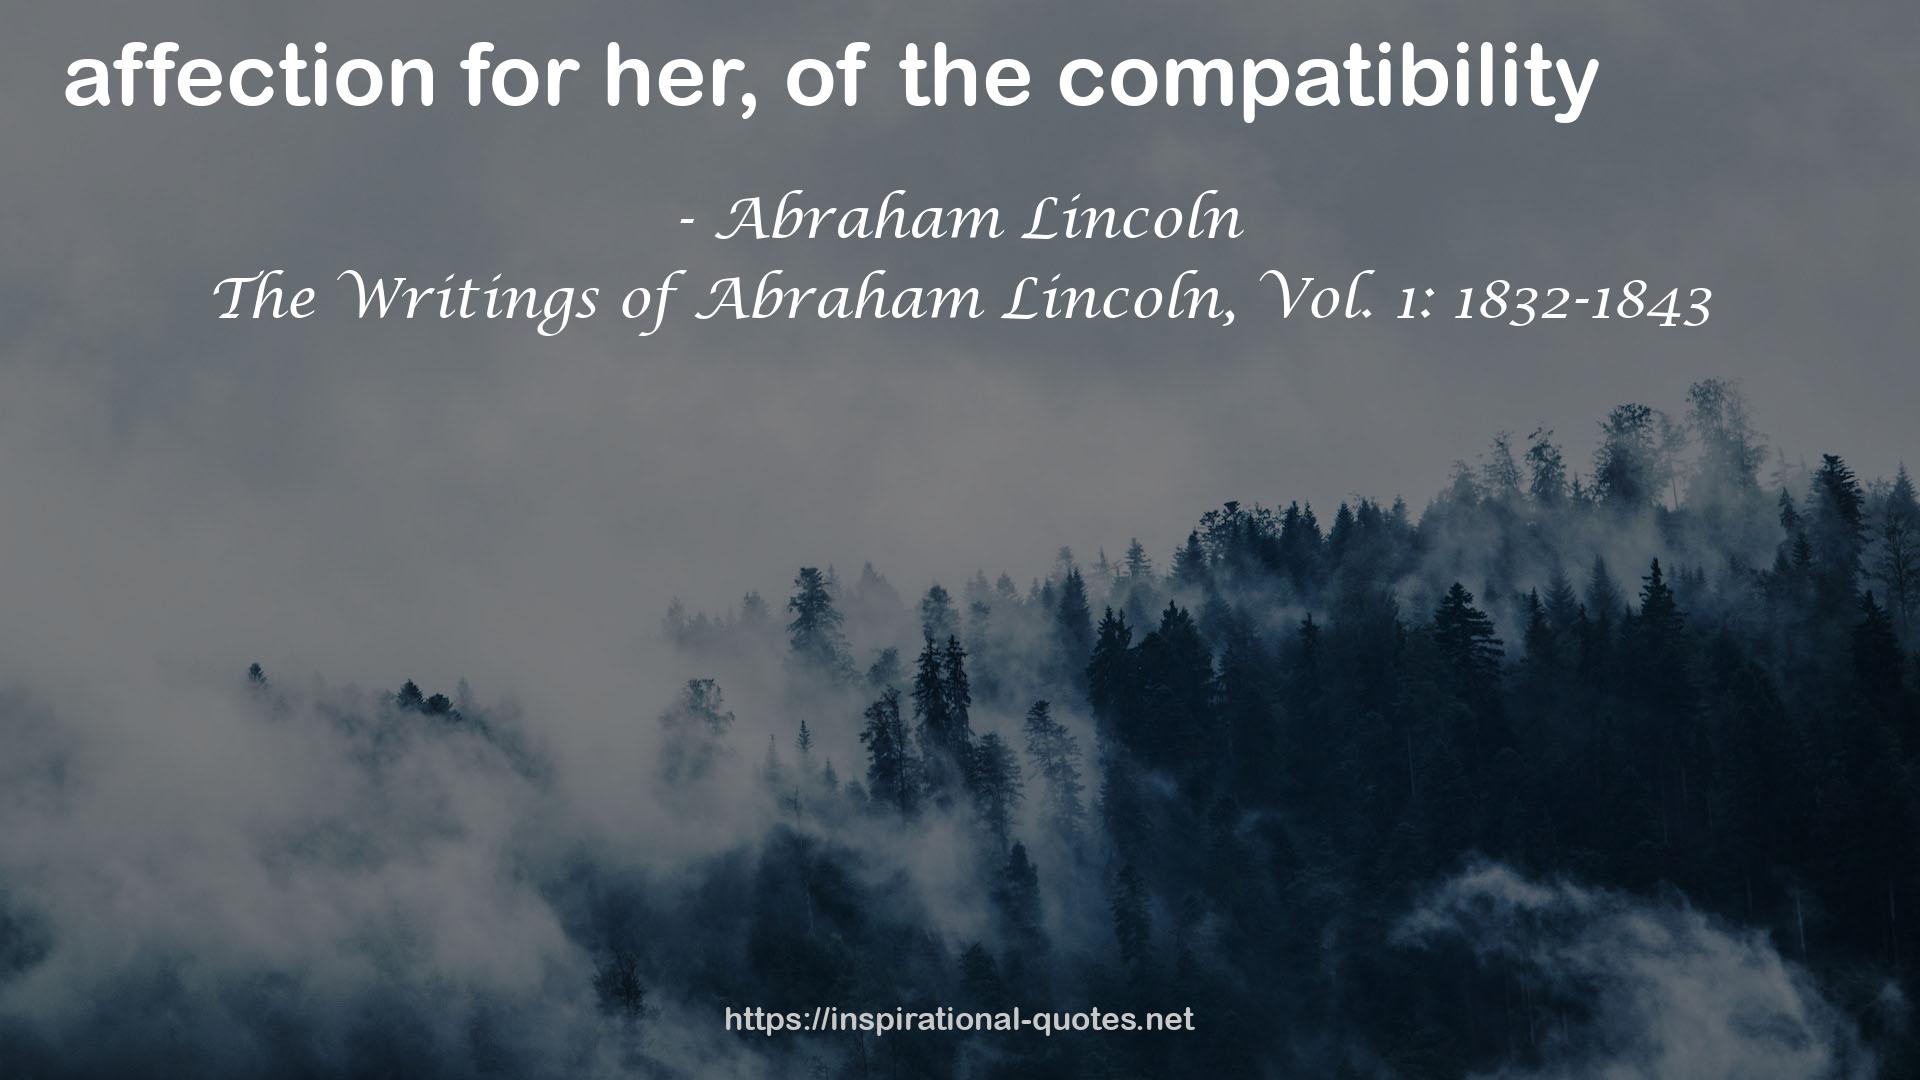 The Writings of Abraham Lincoln, Vol. 1: 1832-1843 QUOTES